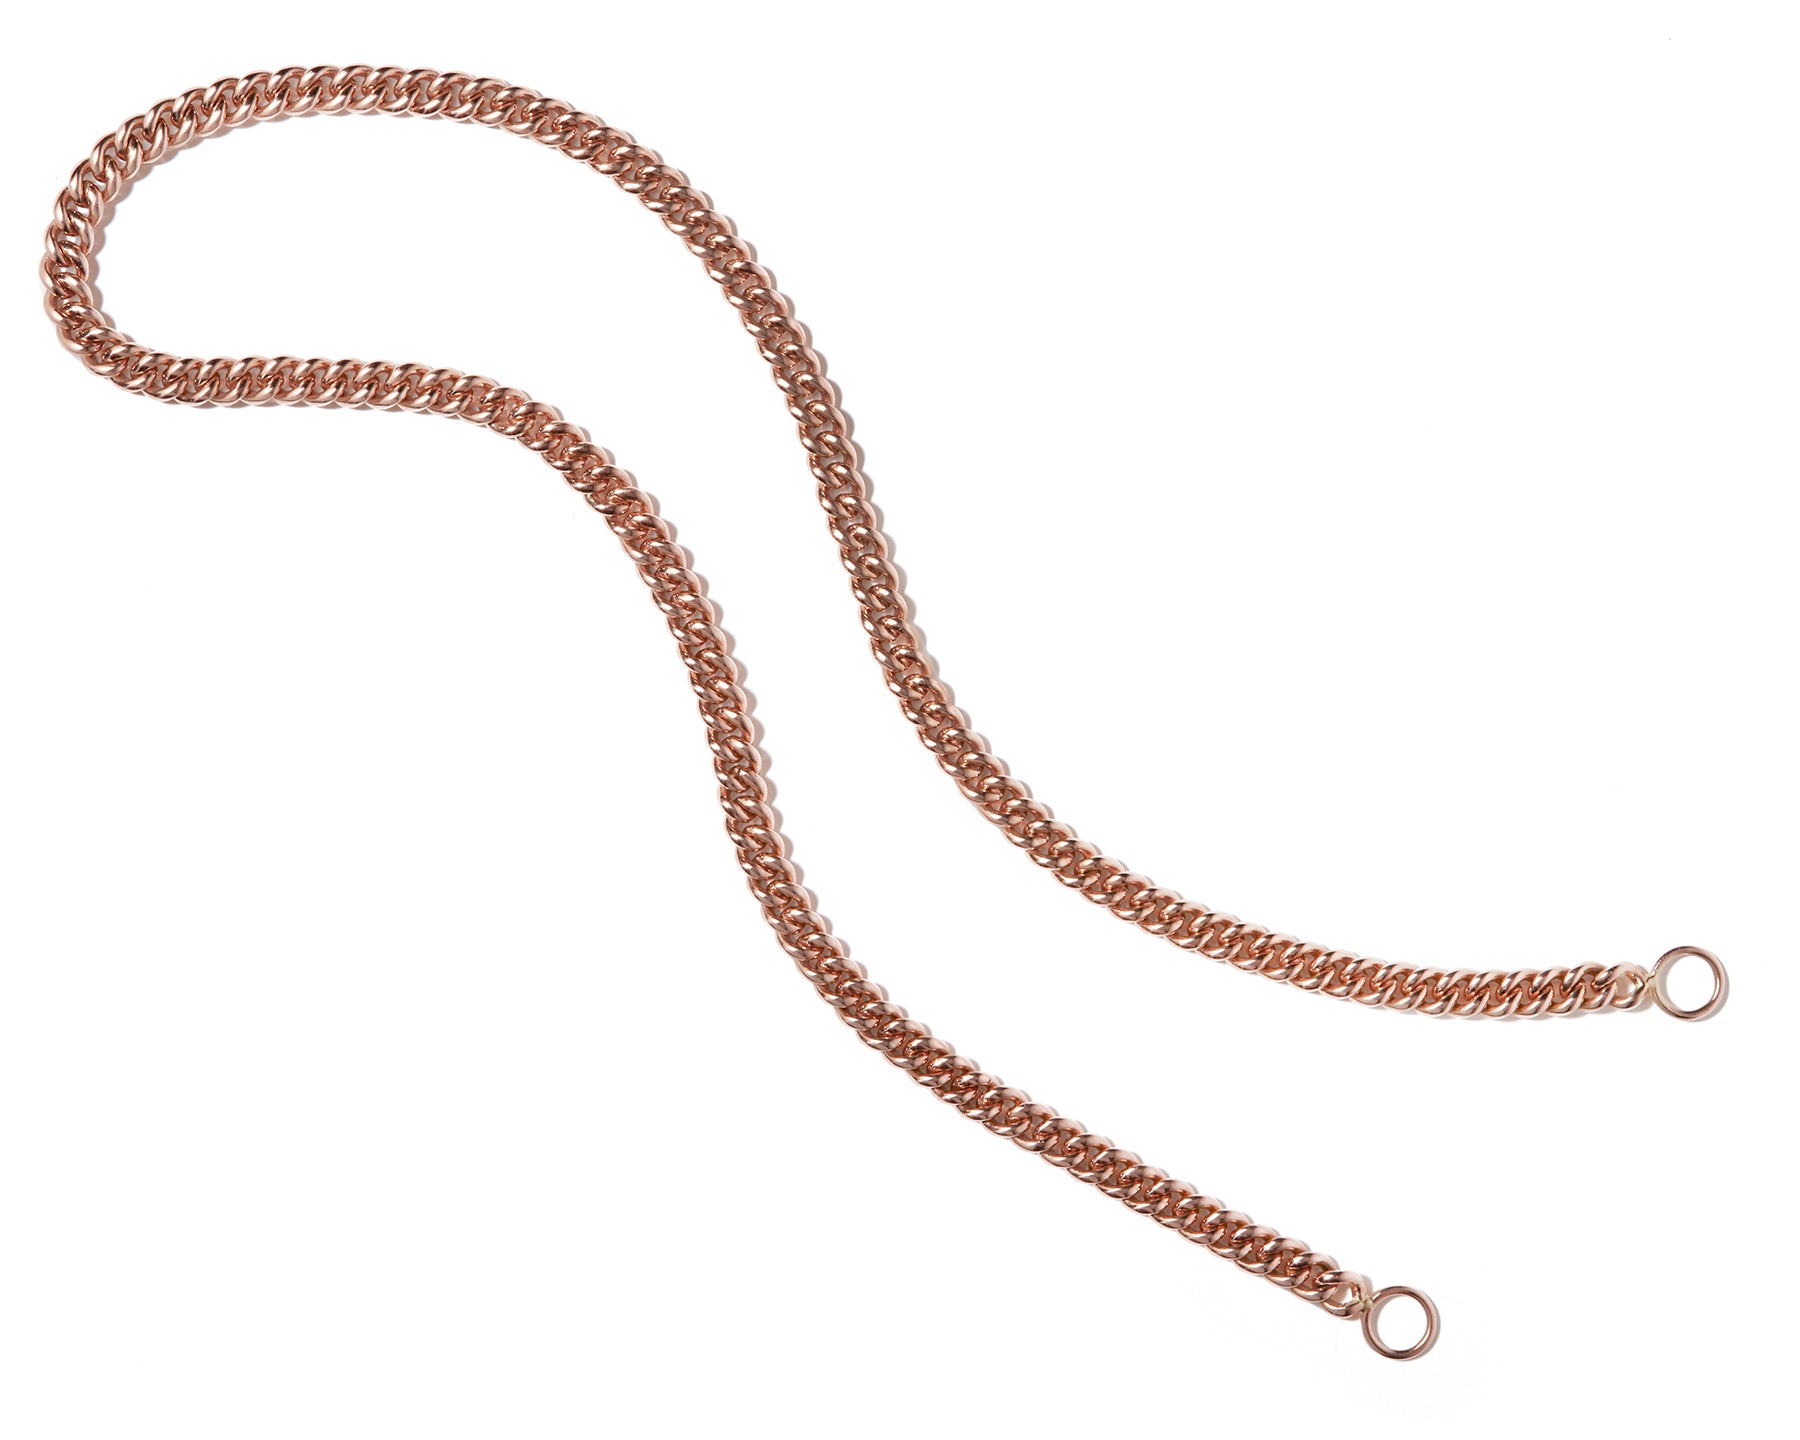 Heavy Curb Chain in Gold Necklace